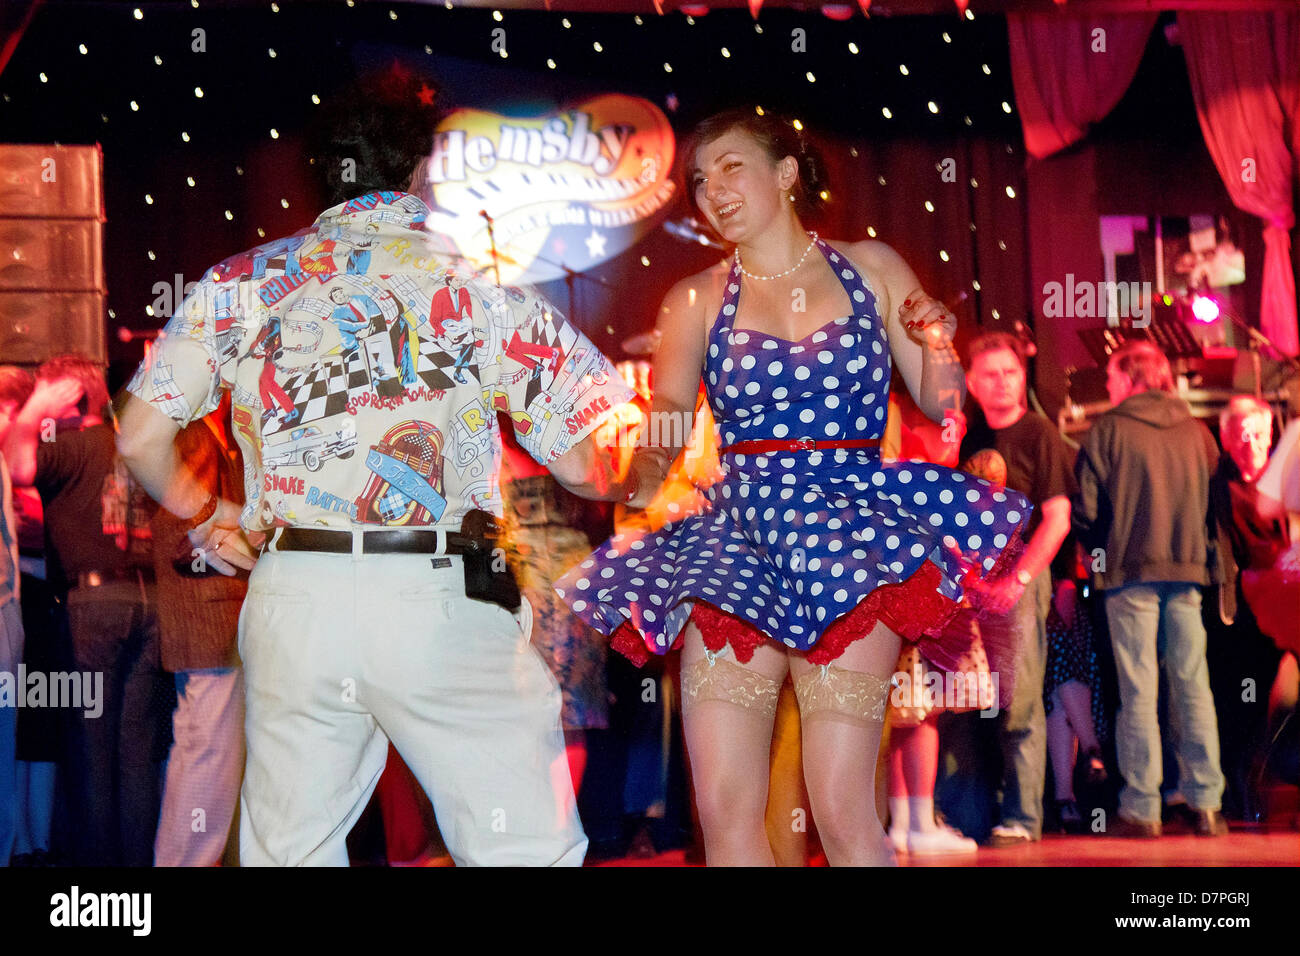 Norfolk, UK. 11th May 2013. Dancing the night away at the Hemsby Rock 'n' Roll Weekender.  Celebrating it's 25th Anniversary, the bi-annual Hemsby event is the longest running rock 'n' roll weekender of its kind and the most popular in the UK. Adrian Buck/Alamy Live News Stock Photo